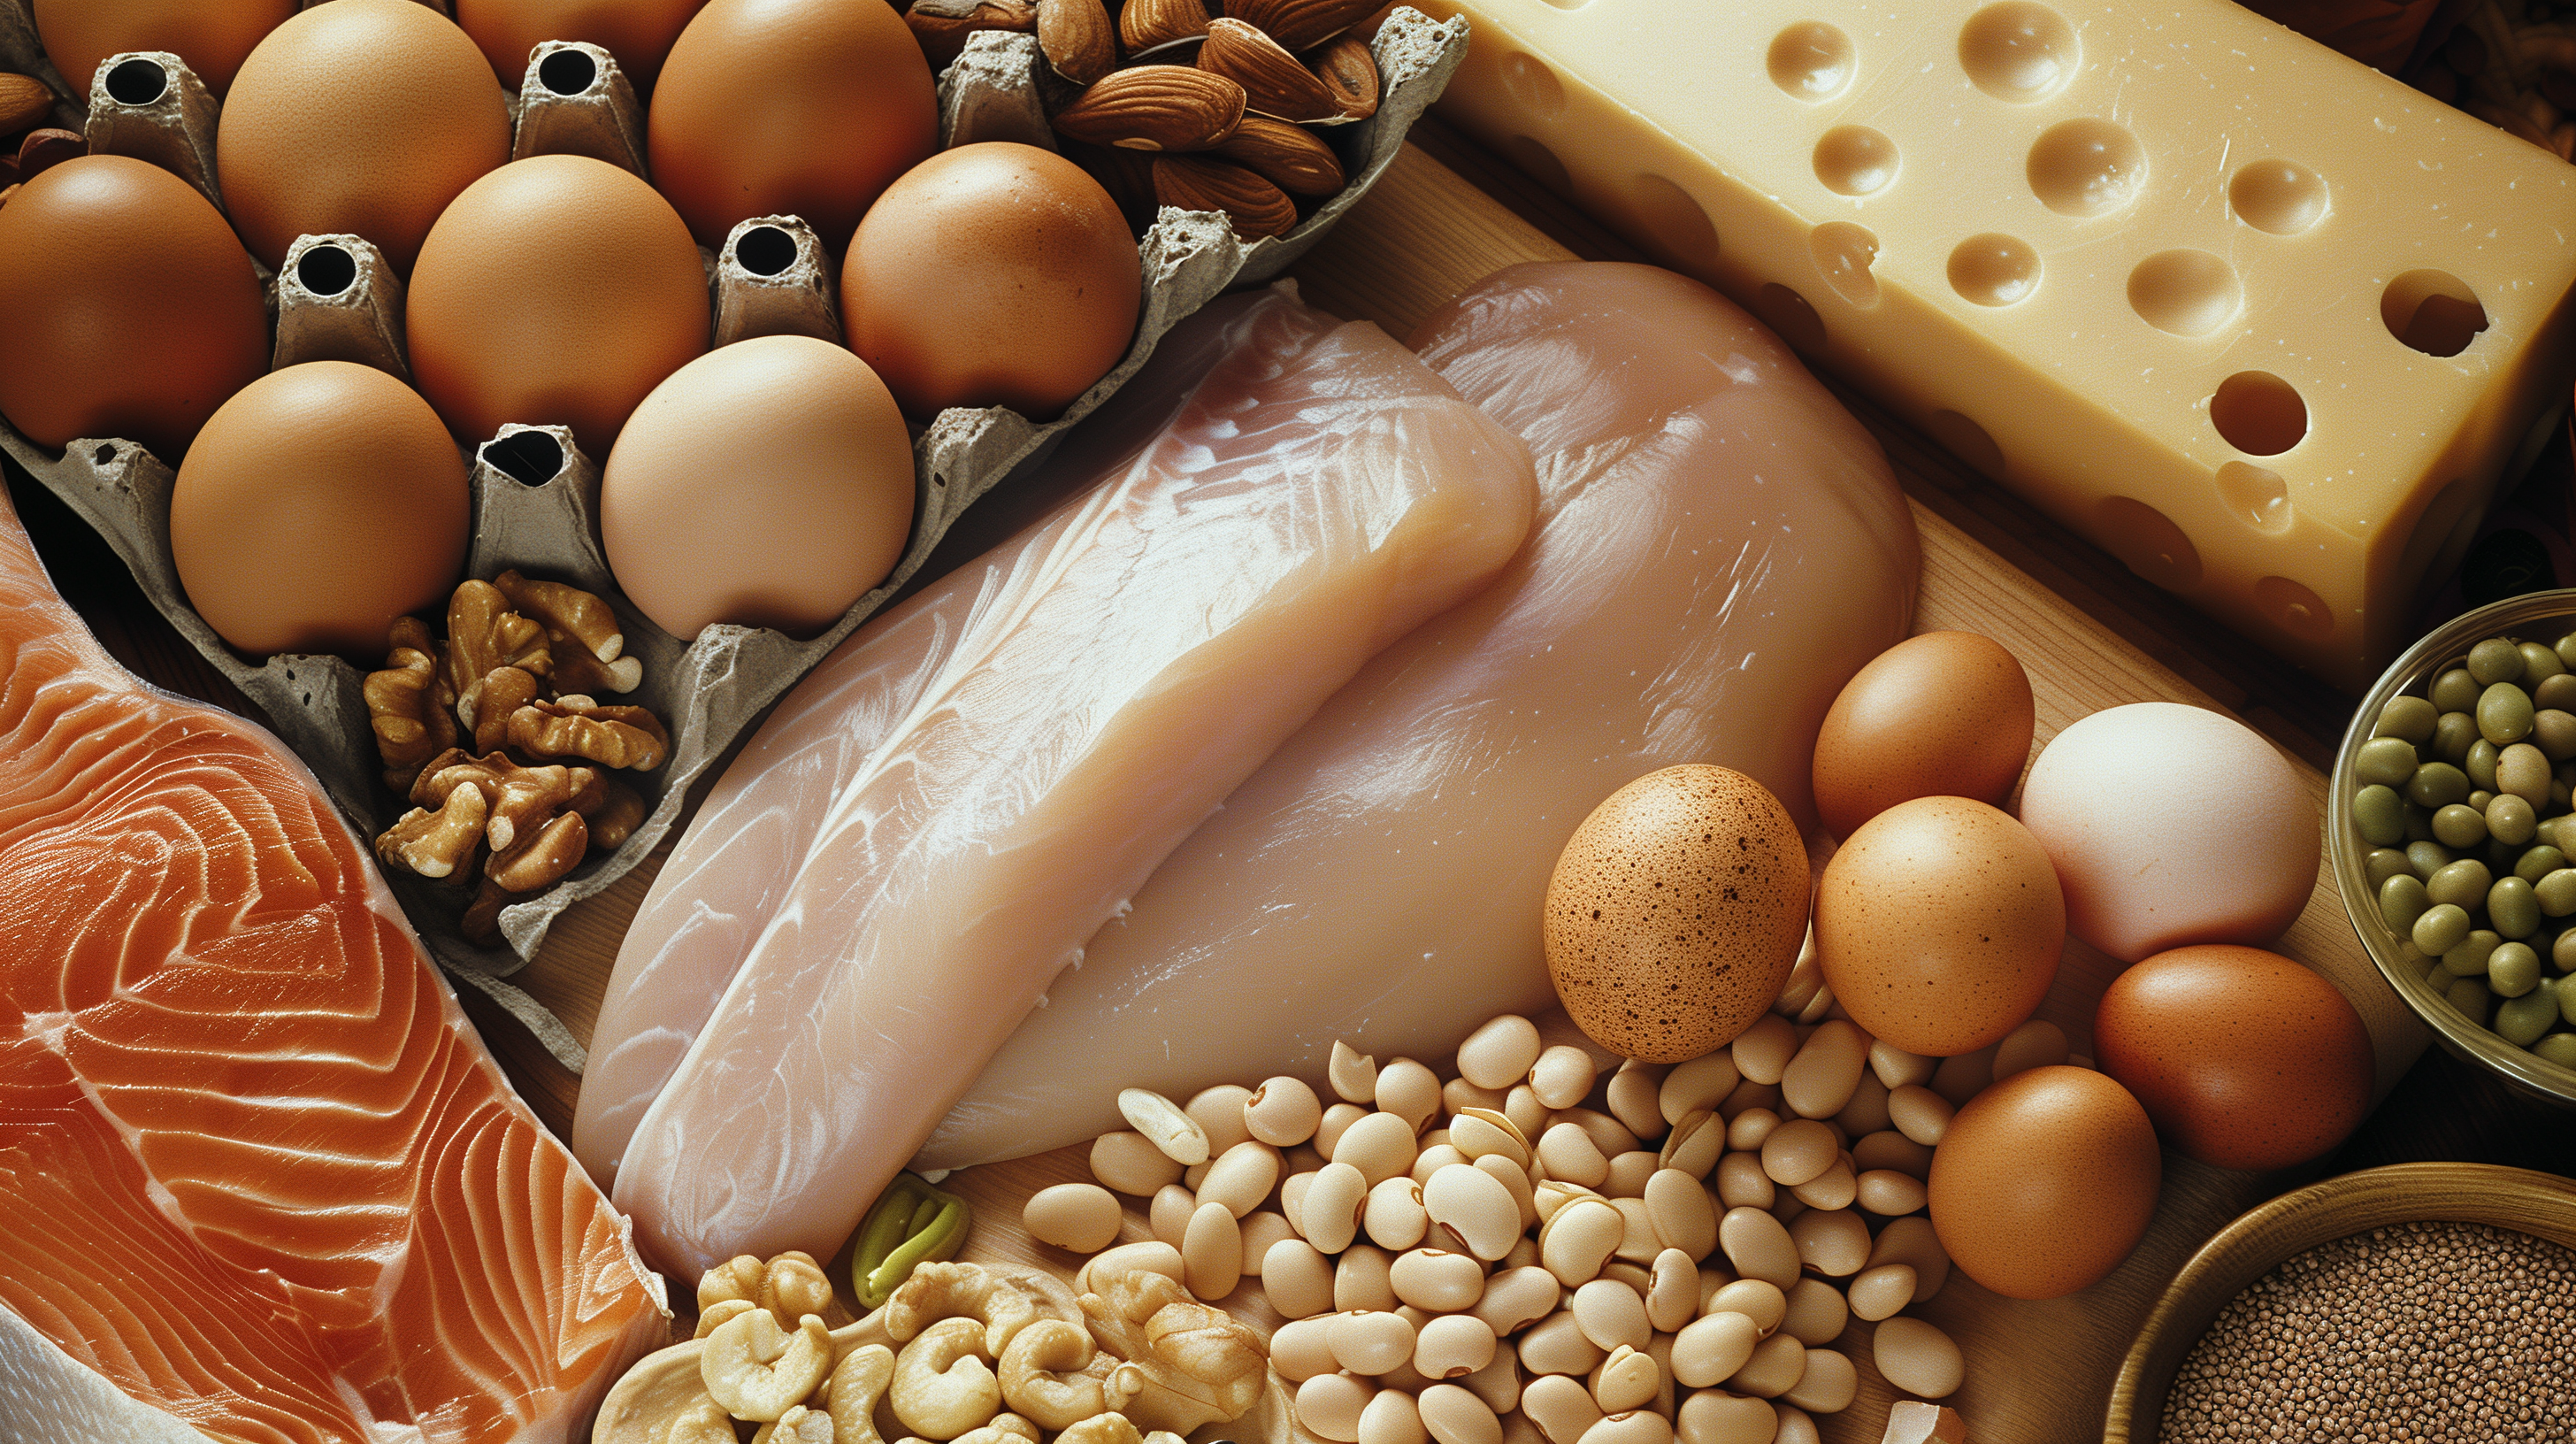 a variety of protein-rich foods (chicken, fish, beans, eggs, and nuts)